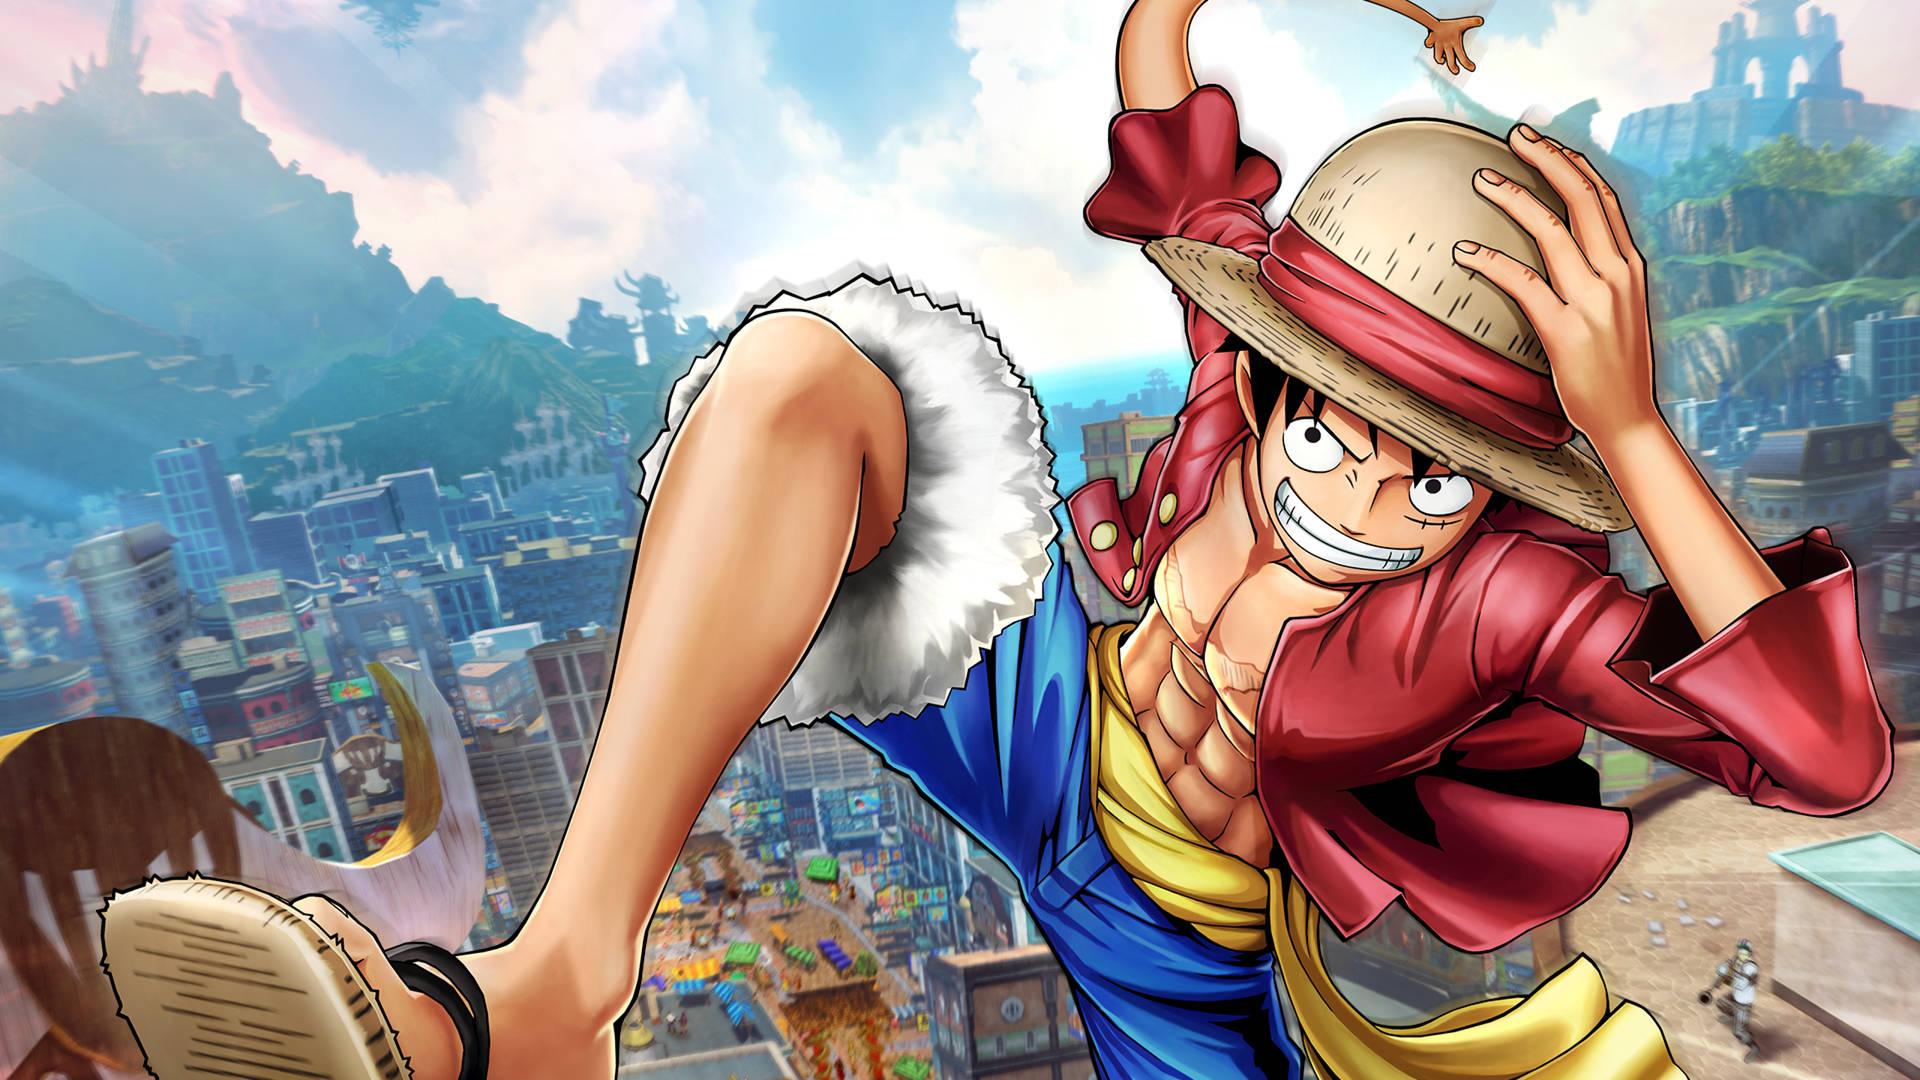 Image Monkey D. Luffy, The Rubber Man Of The Popular Anime Series ‘one Piece’ Background